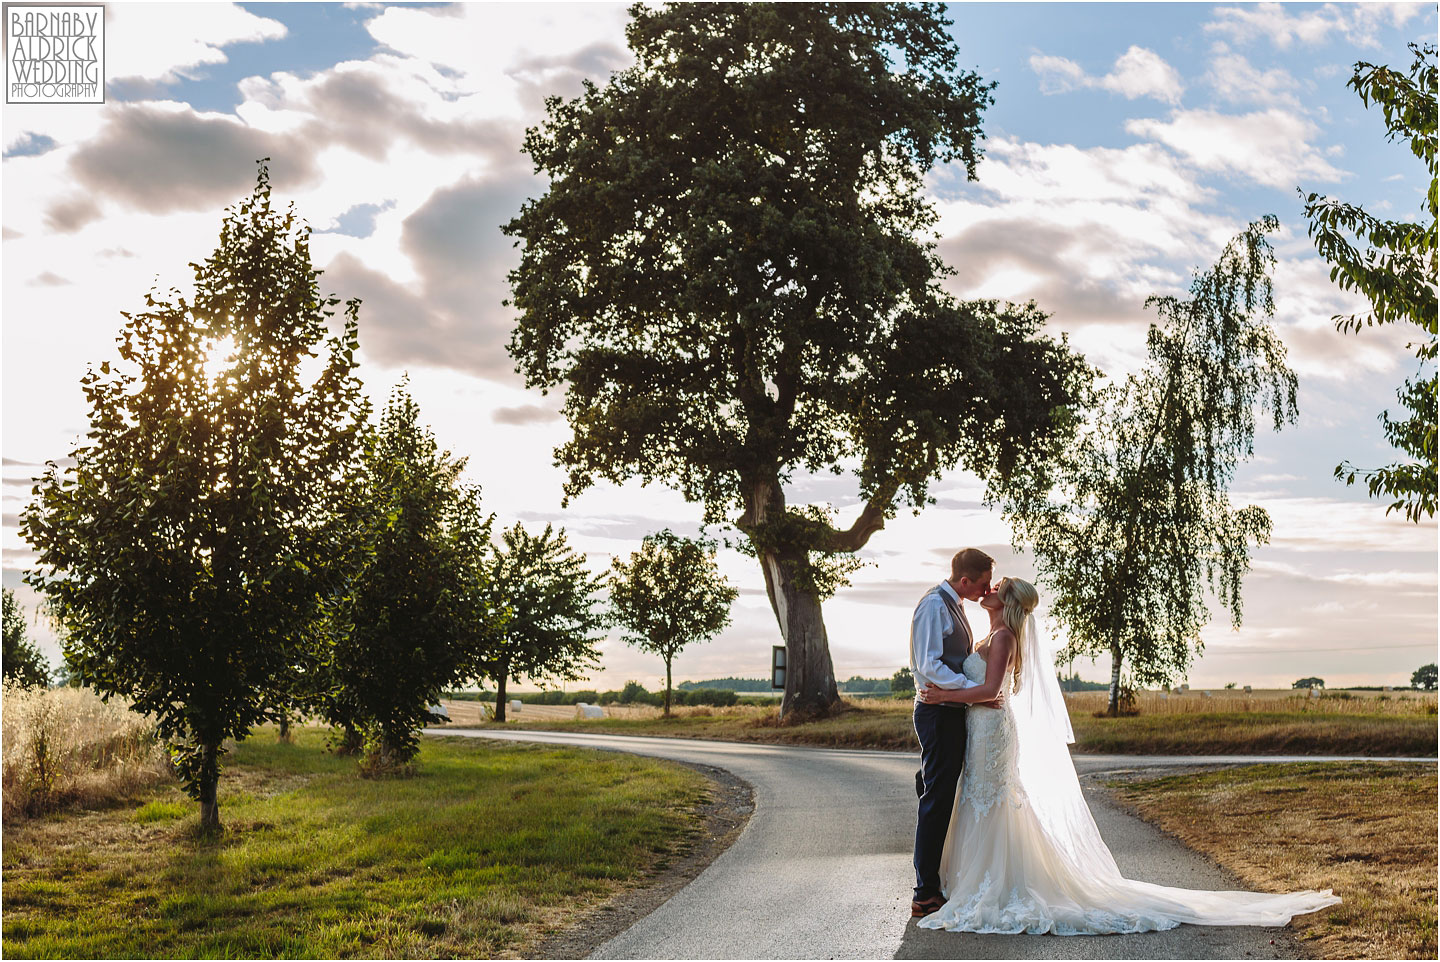 Sunset couple portrait at Priory Cottages Wetherby